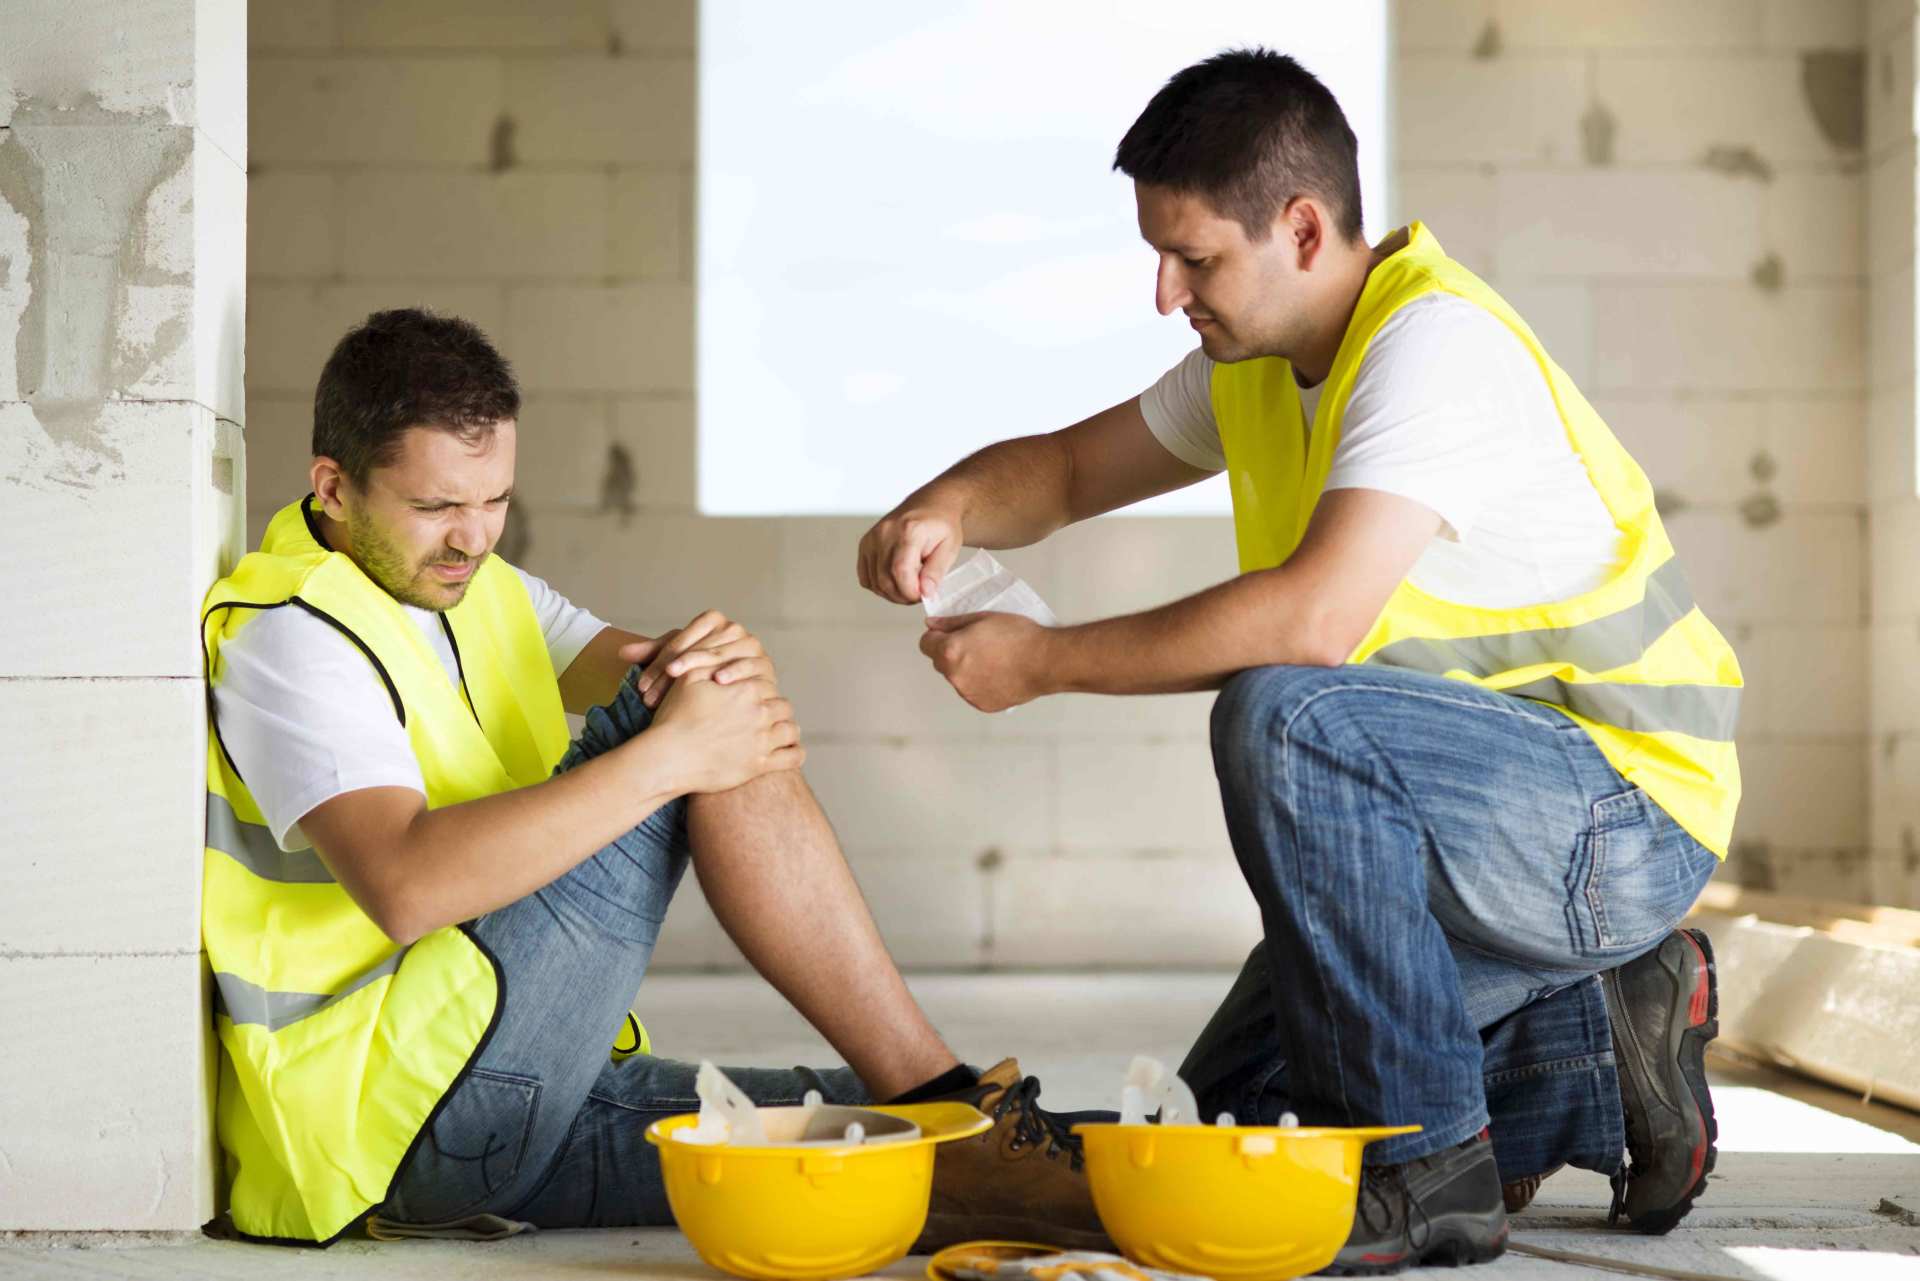 Workers Compensation — Injured Construction Worker in Grantsville, MD